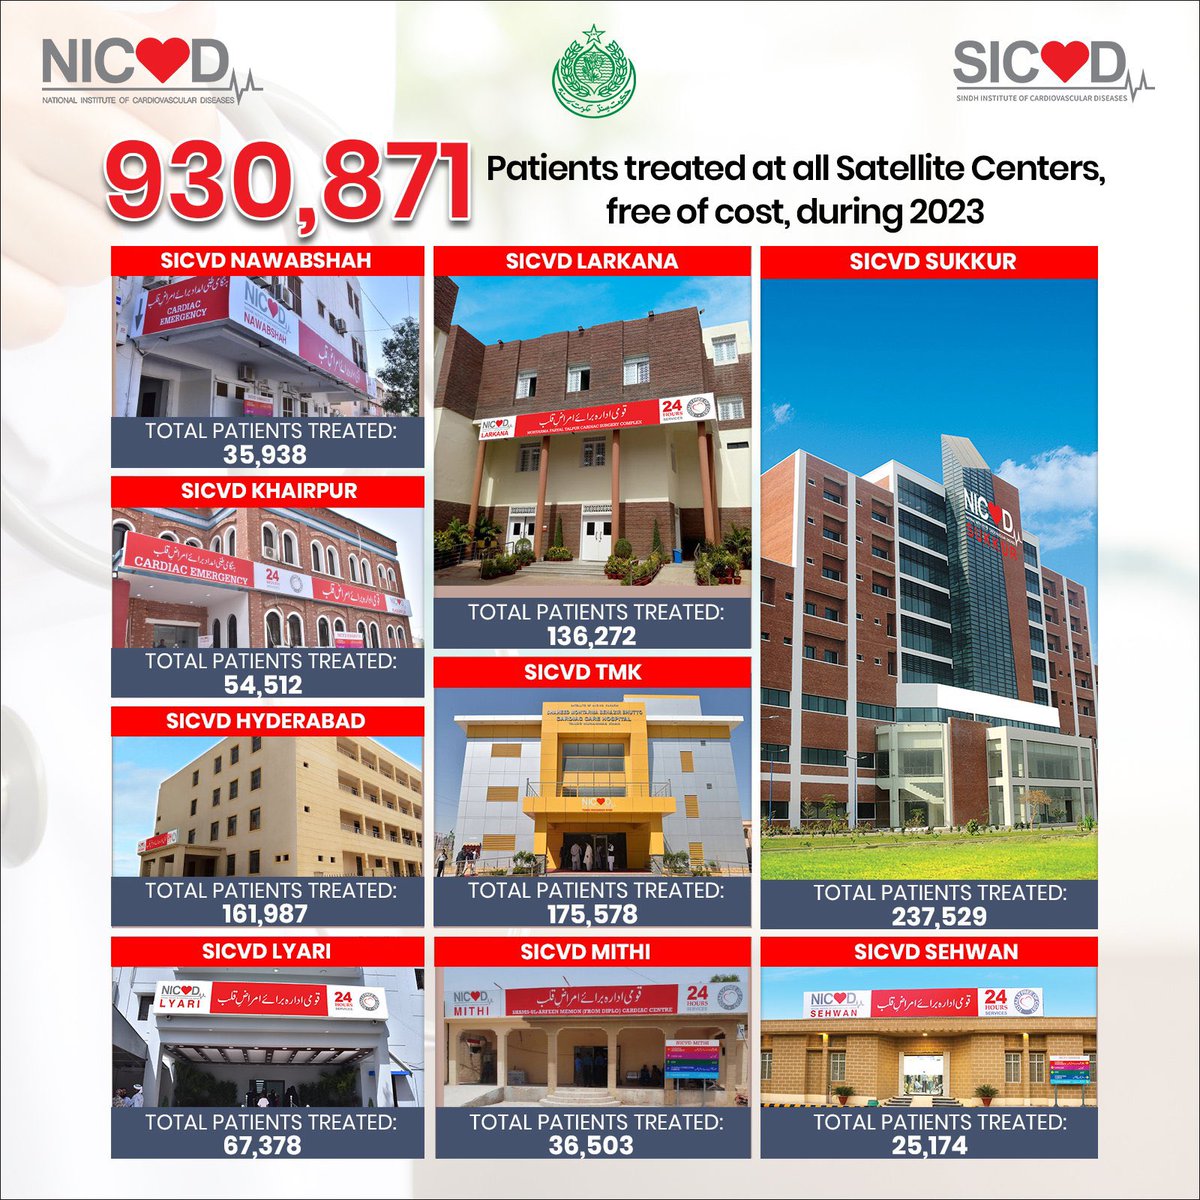 In the year 2023, a total of 930,871 patients were treated at all satellite centers, completely free of cost.
#NICVD #SICVD #FreeOfCost #QualityHealthcare